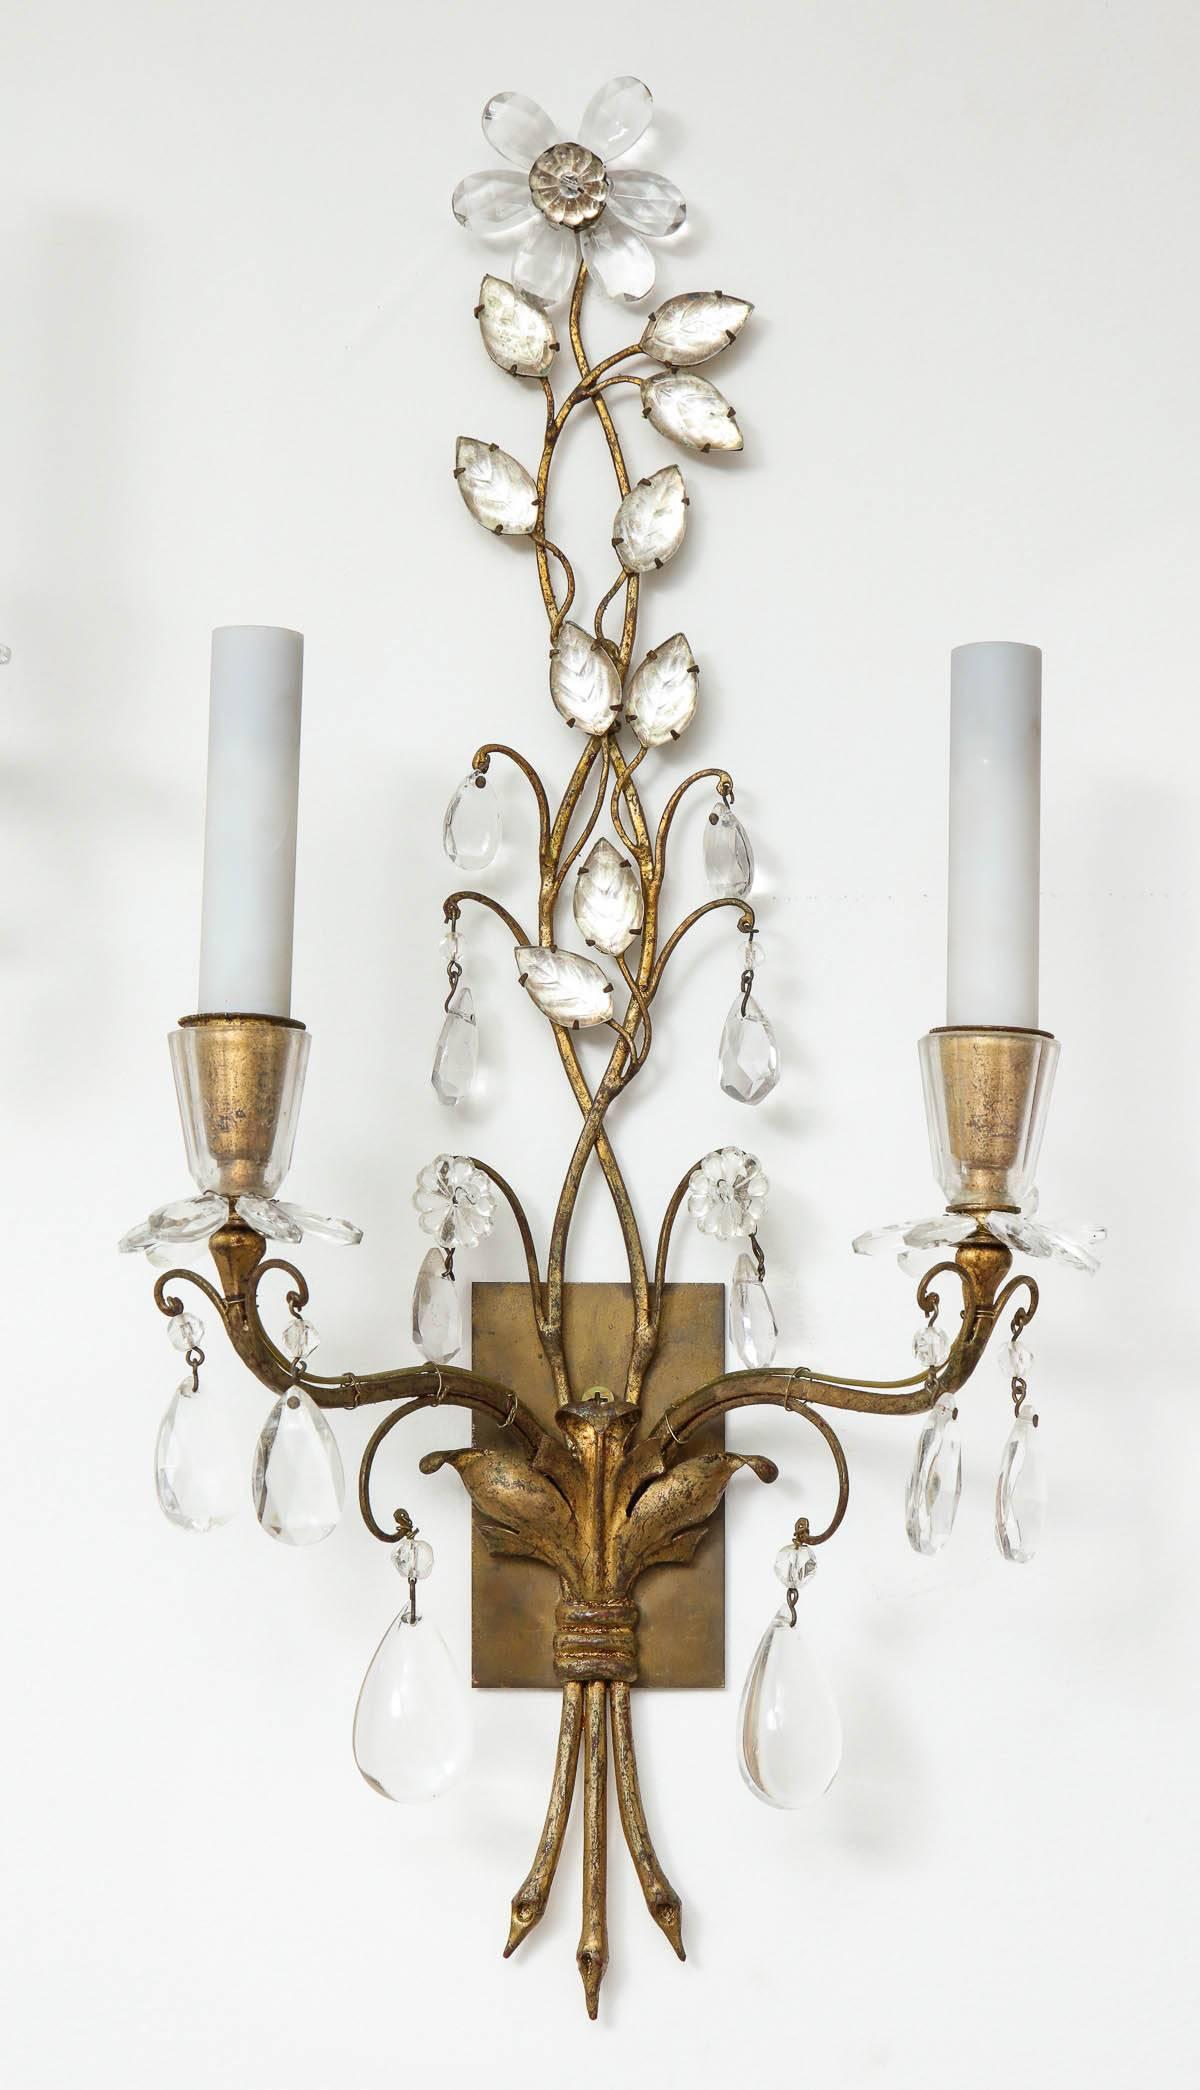 Pair of gracious French gilt metal and crystal floral sconces by Maison Bagues.
The sconces are in great condition and have been newly rewired.